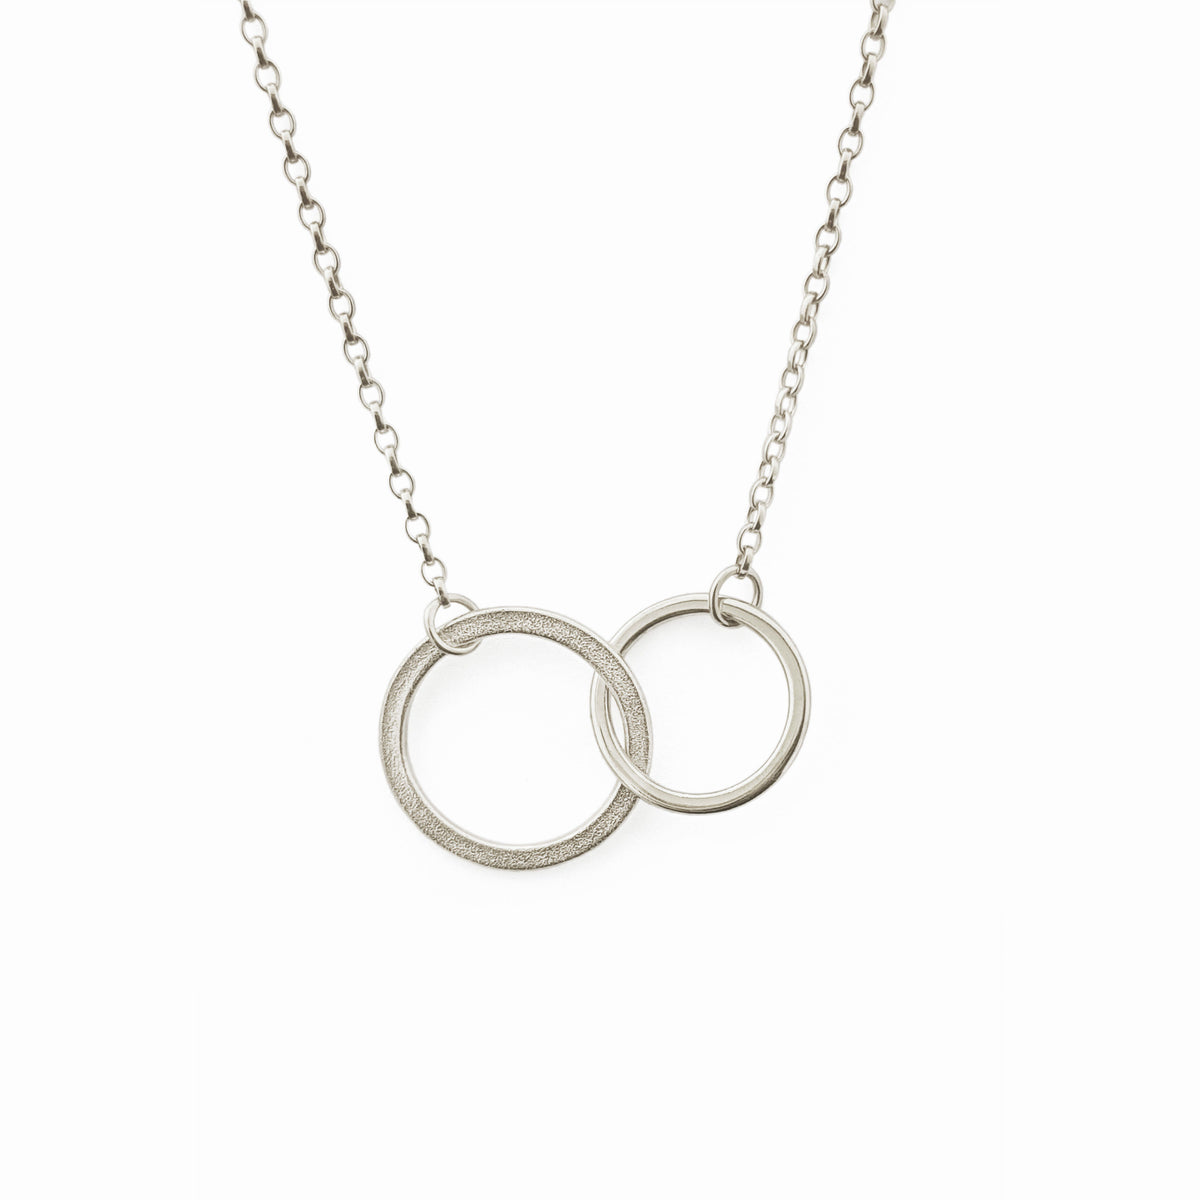 Interlinked Ellipse Necklace - Boutee